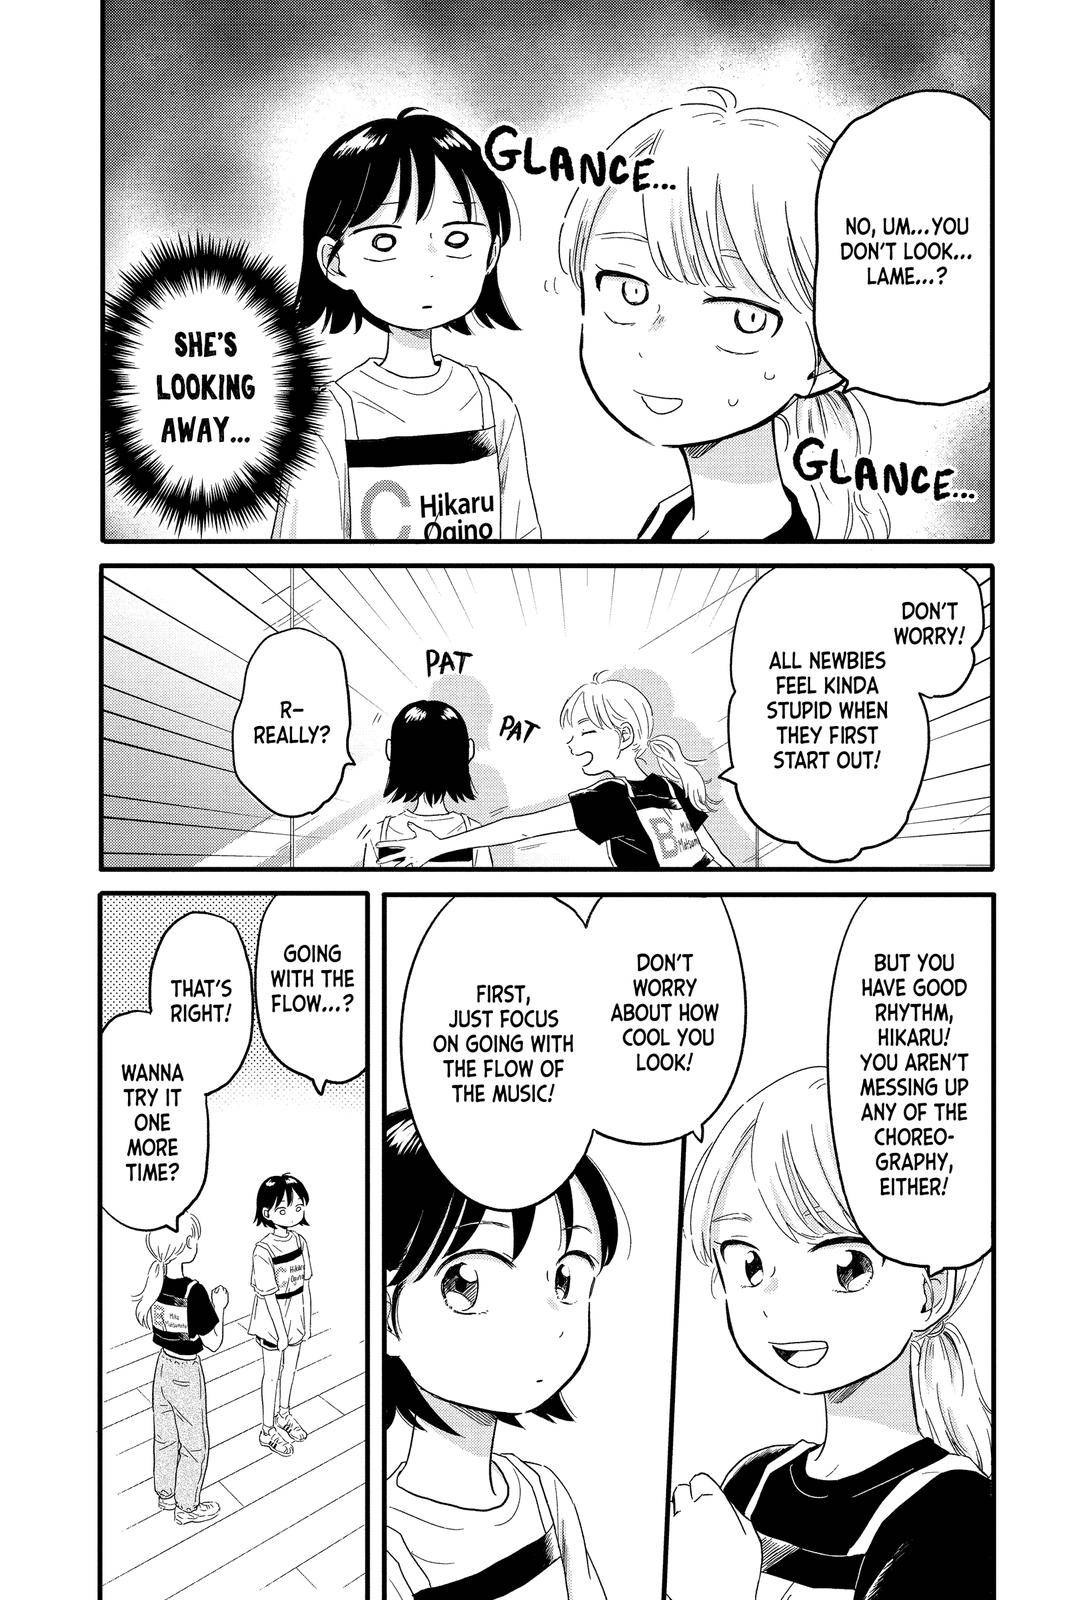 Hikaru In The Light! - chapter 12 - #6